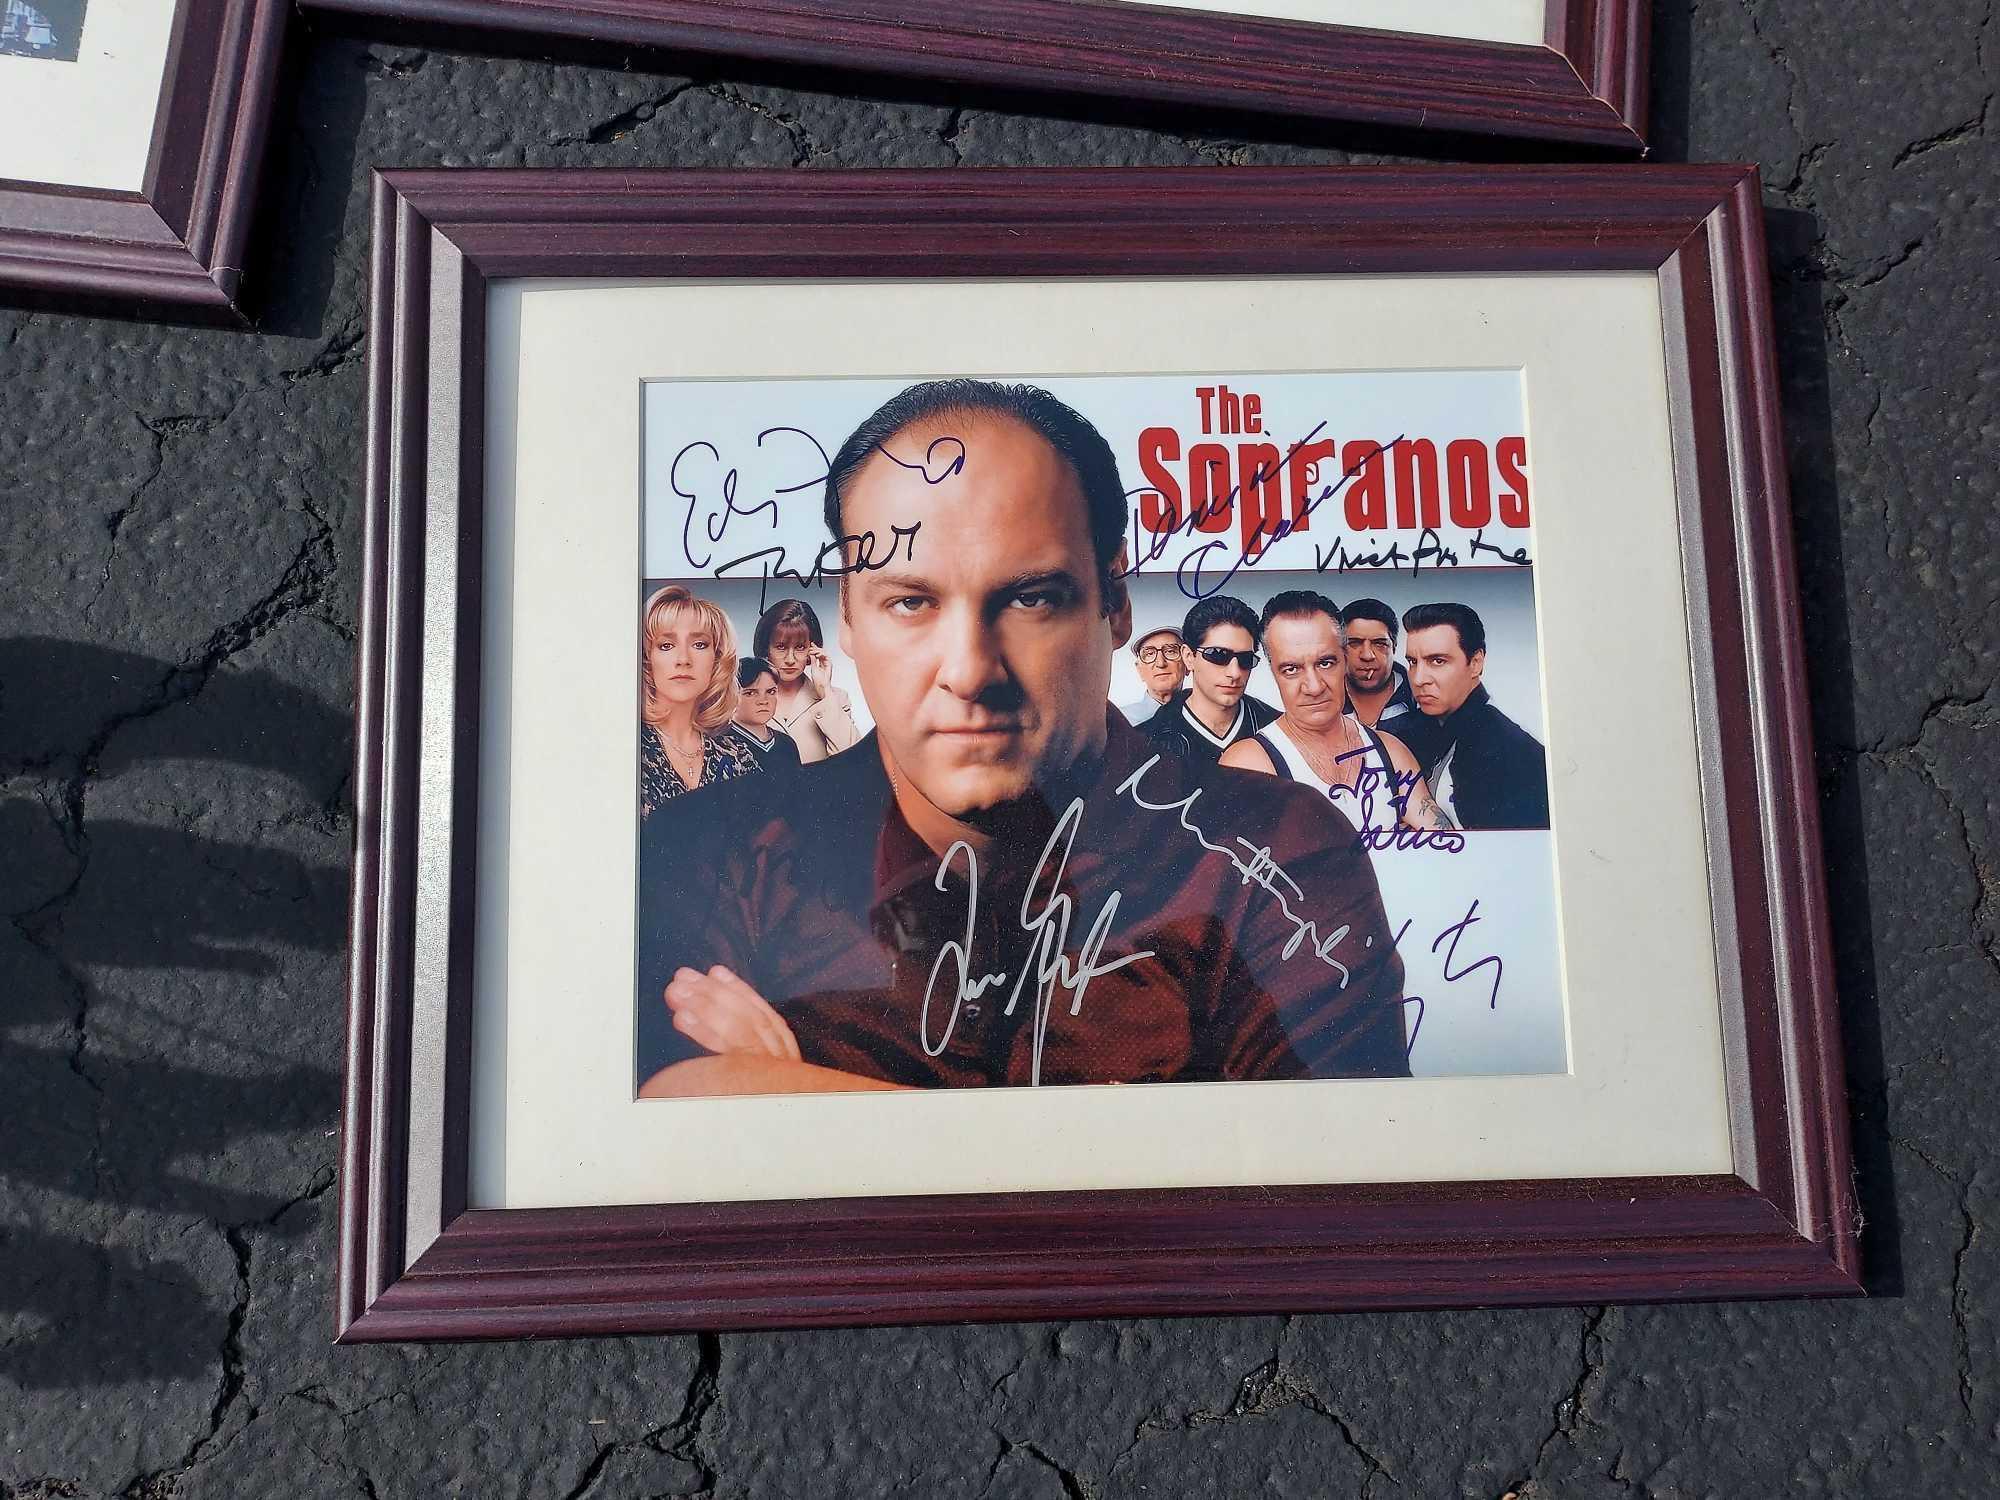 Signed Framed Movie Pictures - Sopranos Cast, The Godfather, GoodFellas, Wise Guys, & Chariot